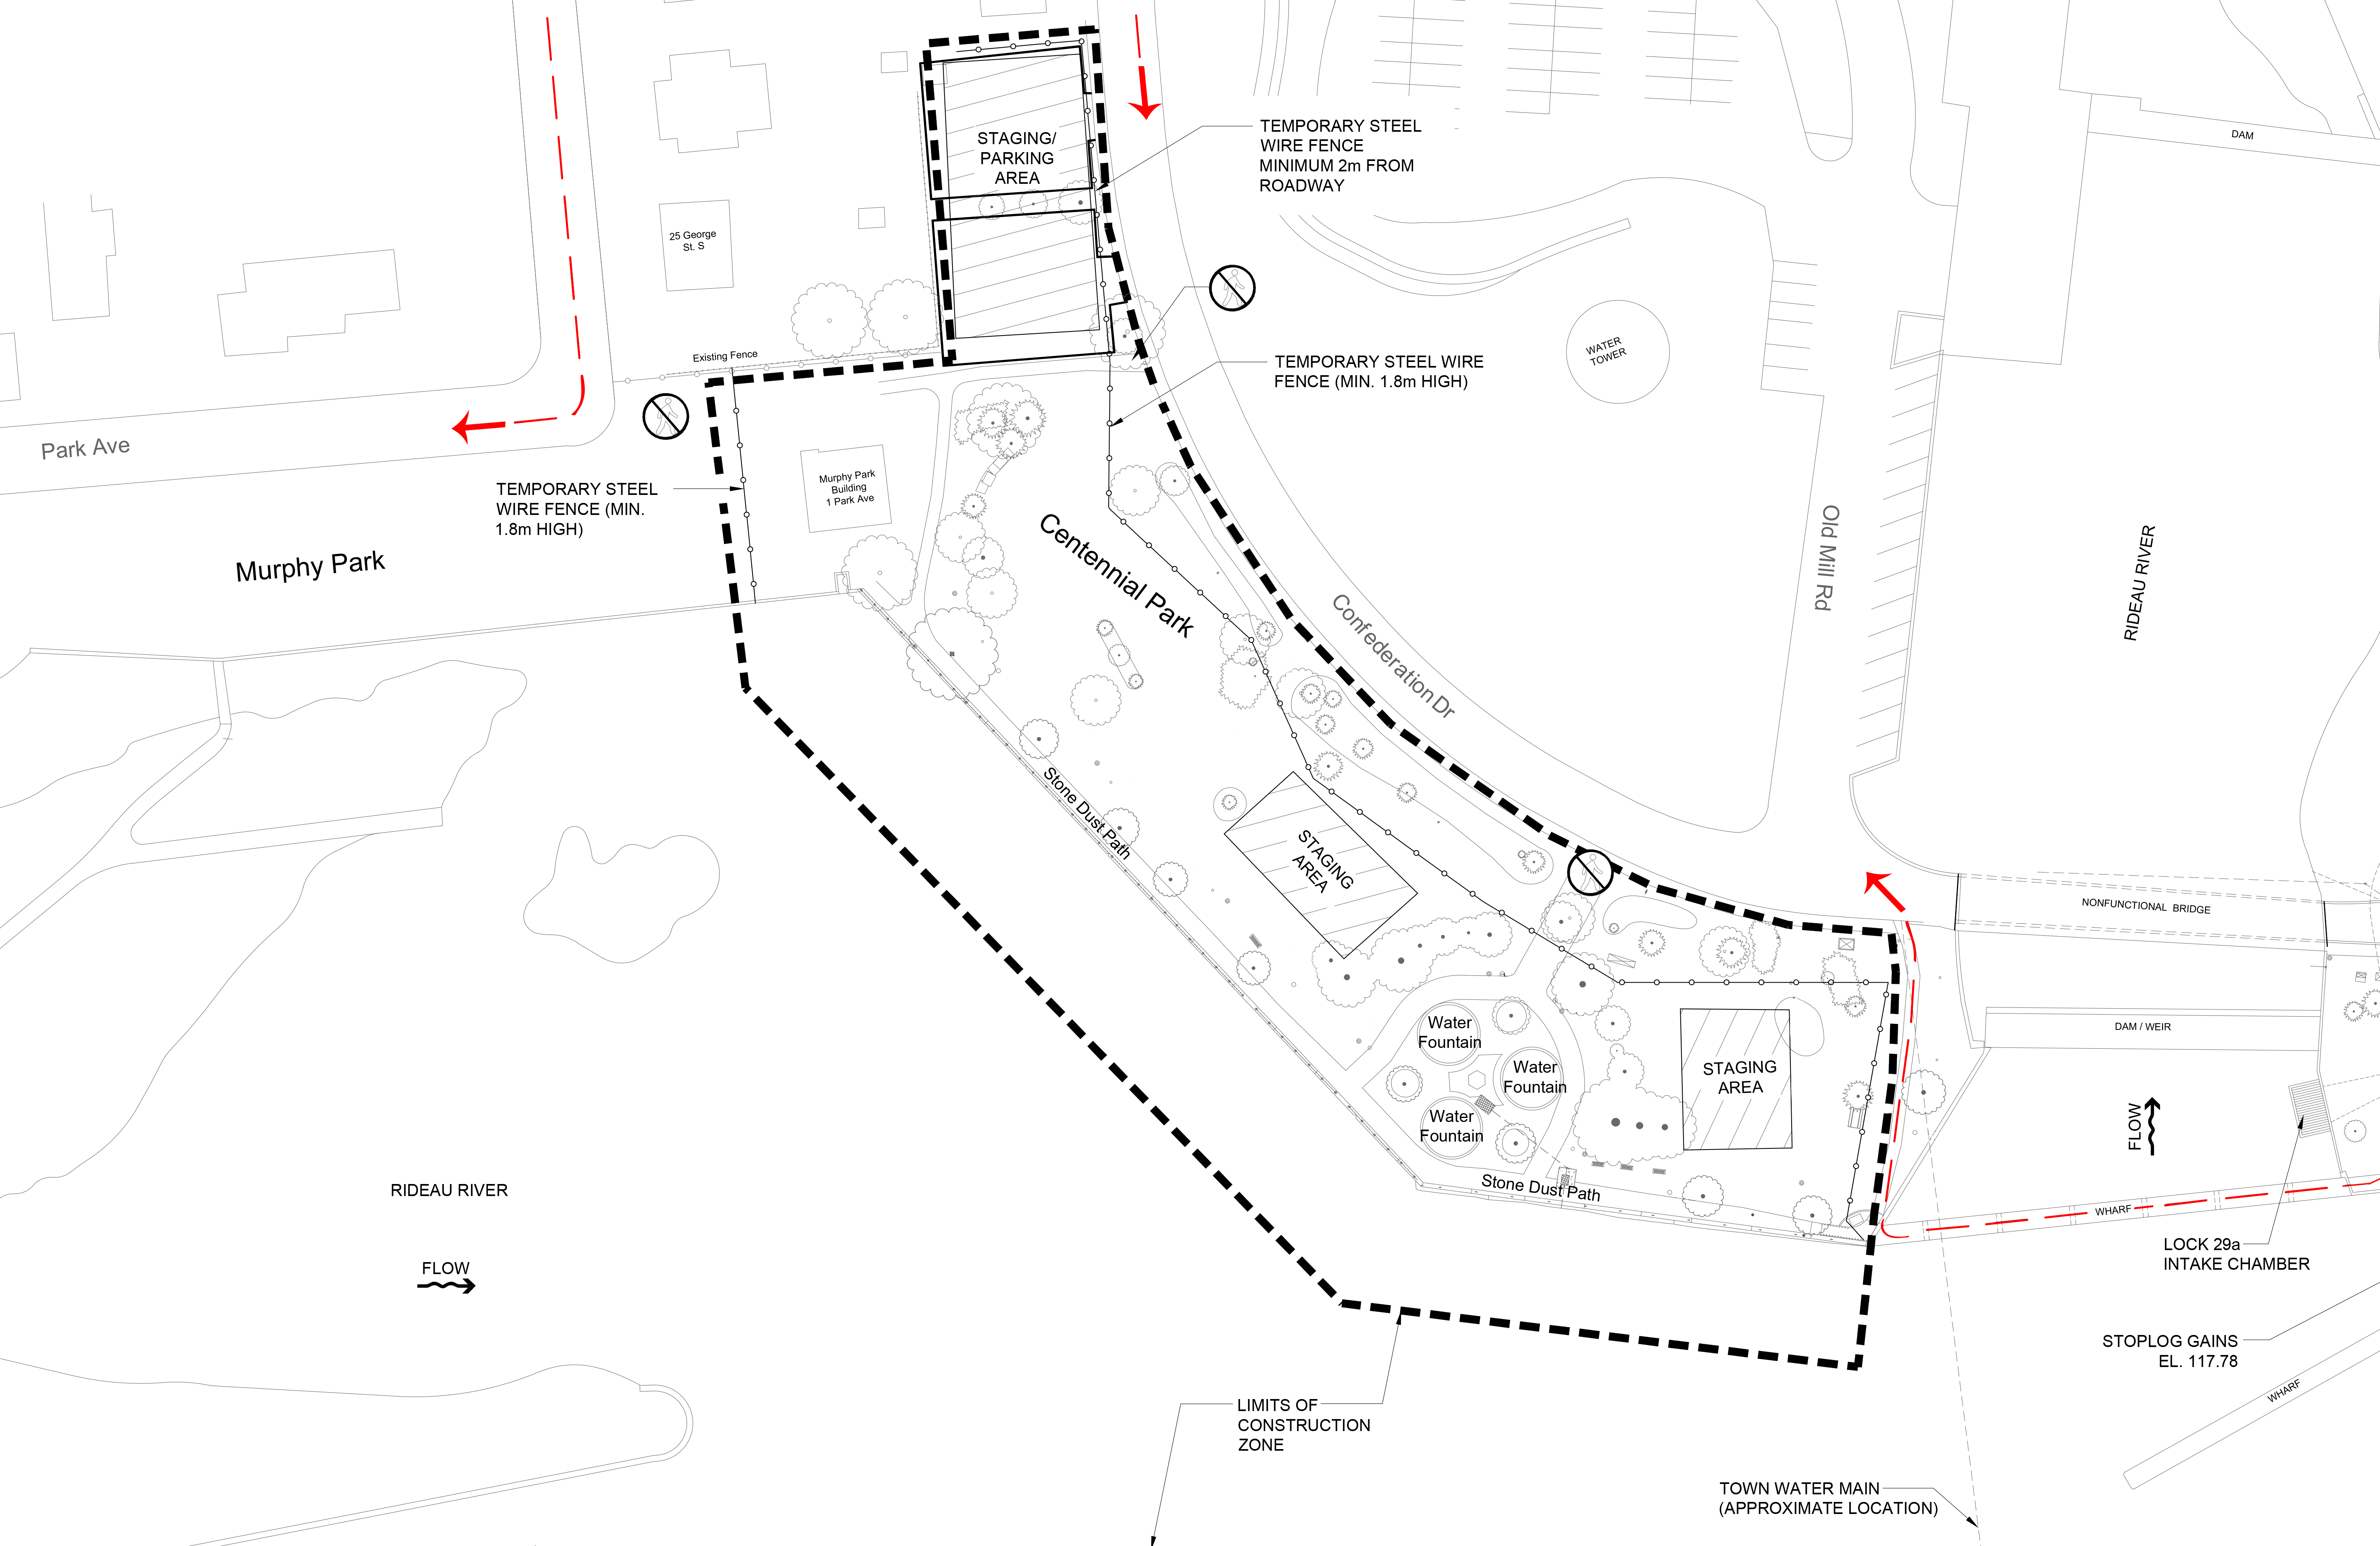 Map showing Centennial Park fenced to allow for construction staging and safety. Paths are re-routed via Confederation Drive, Strathcona St., and Park Ave.